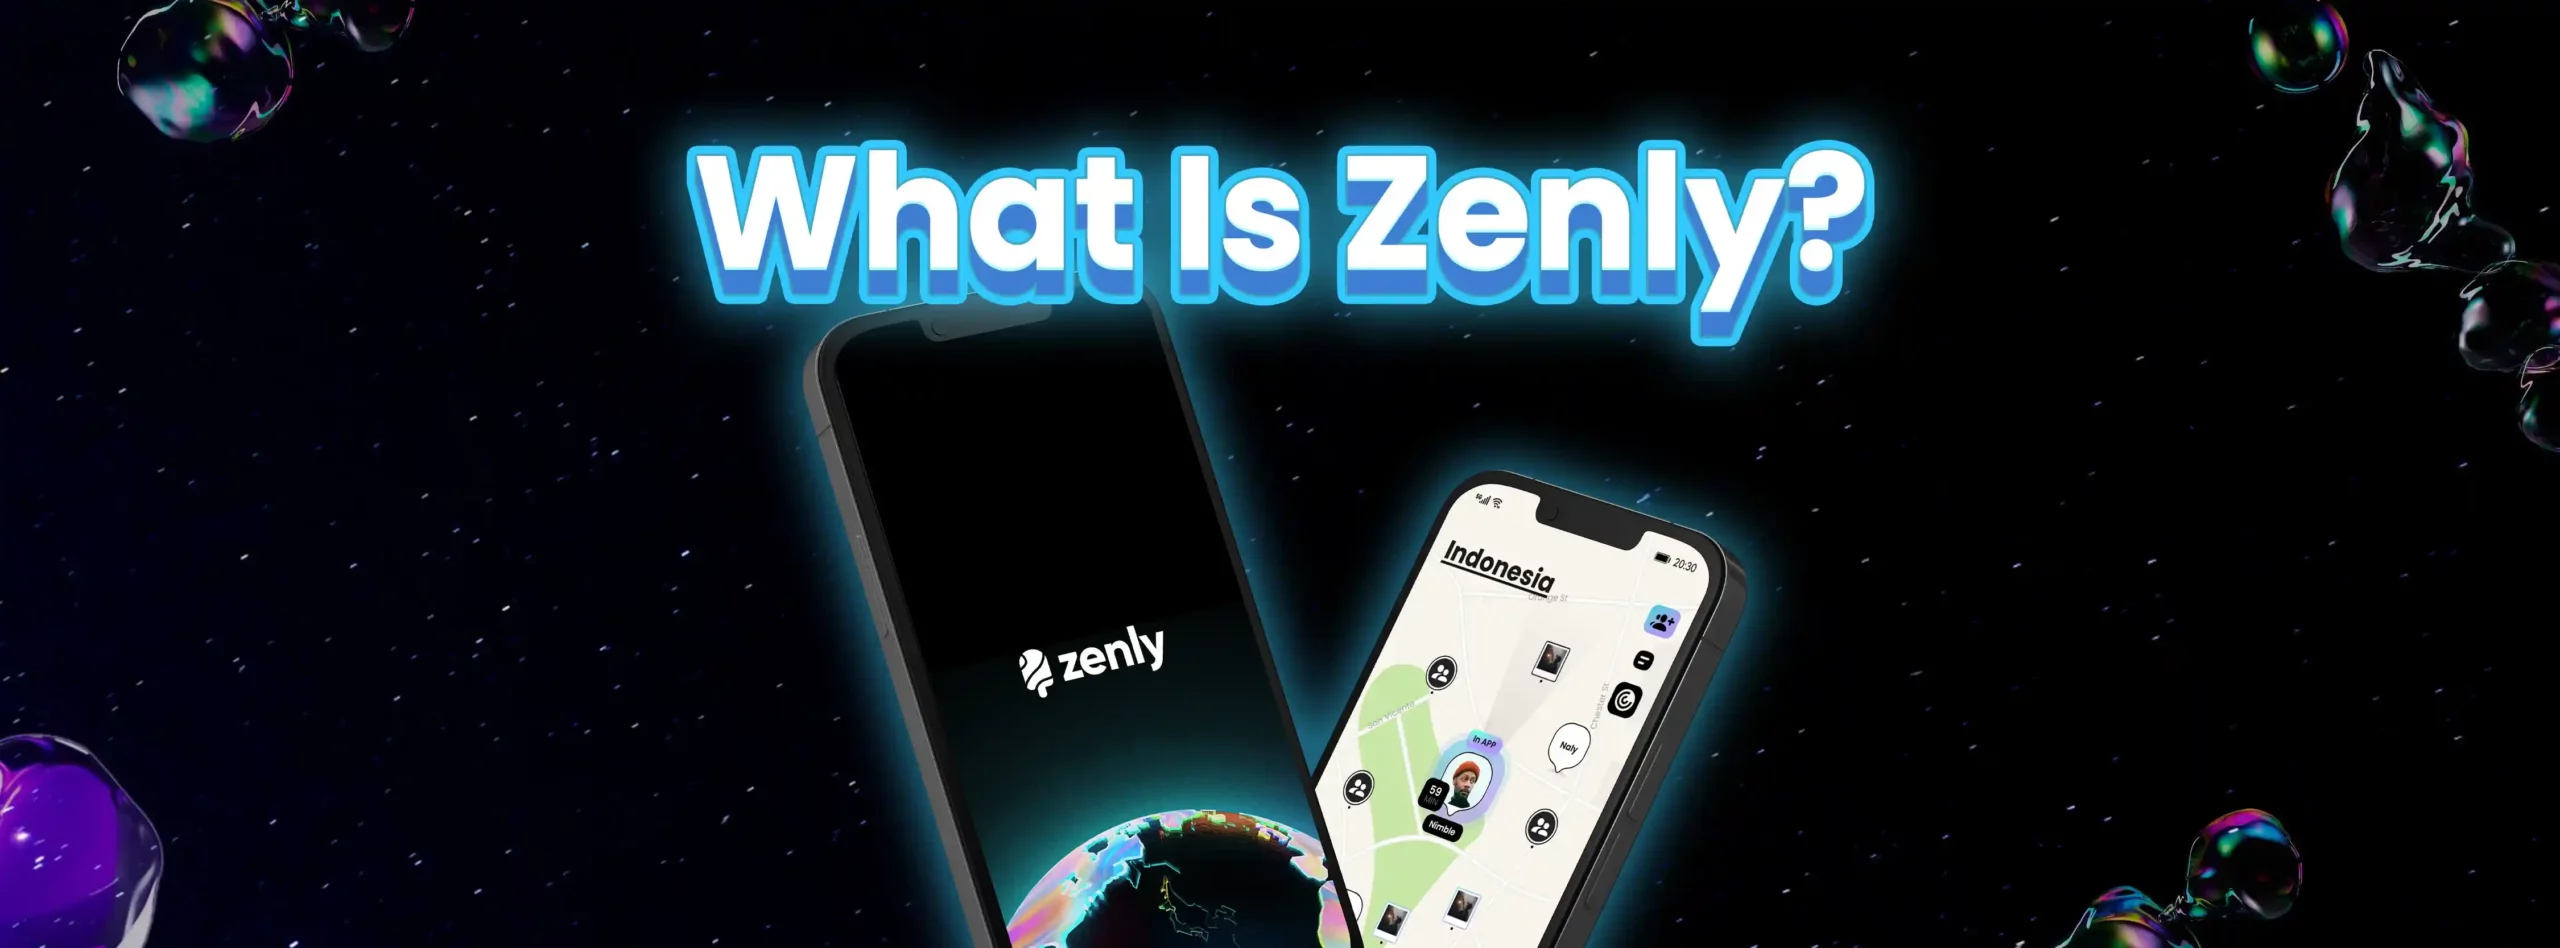 What is Zenly